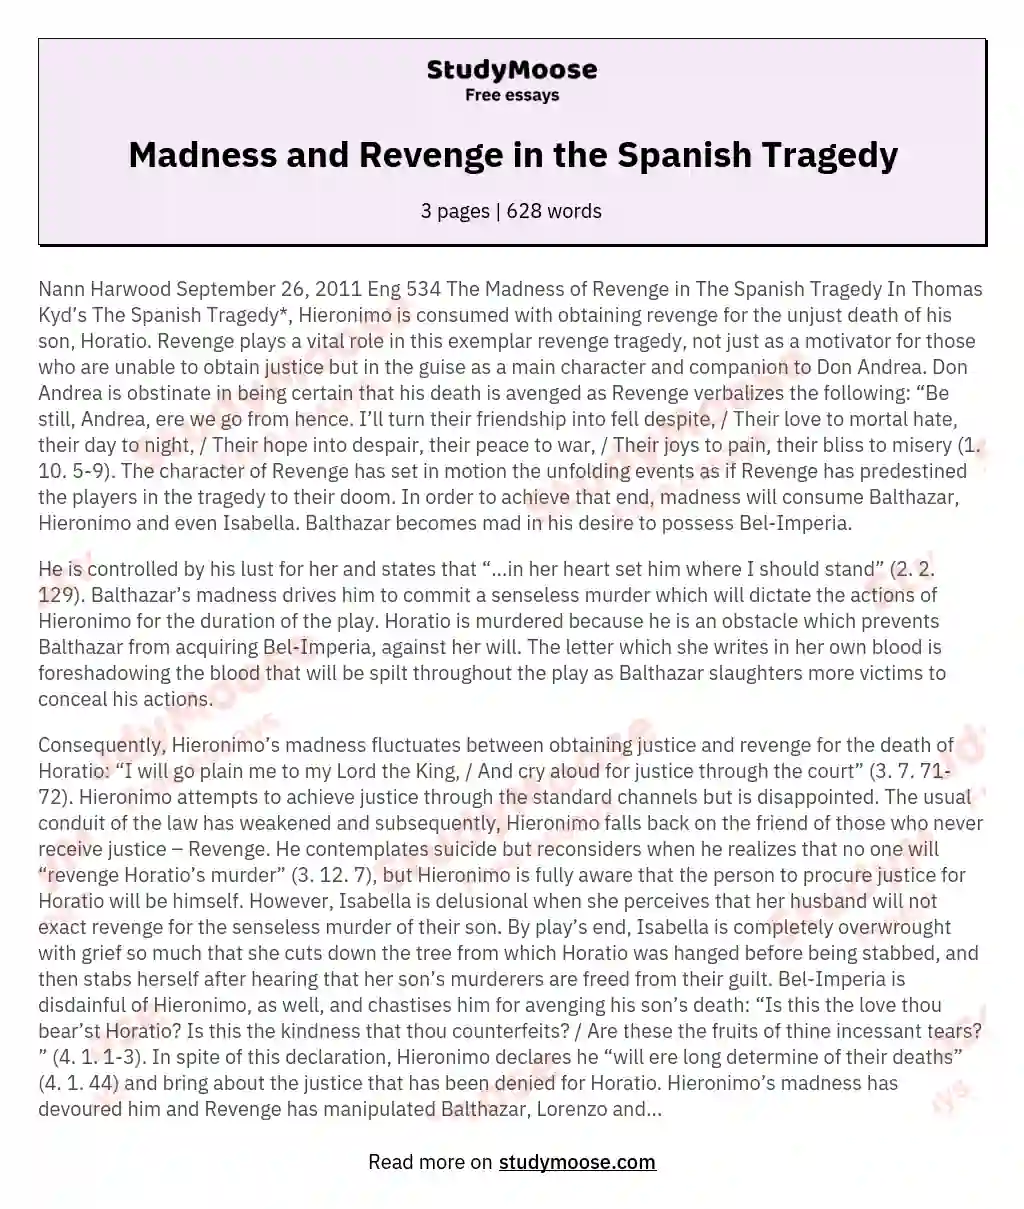 Madness and Revenge in the Spanish Tragedy essay